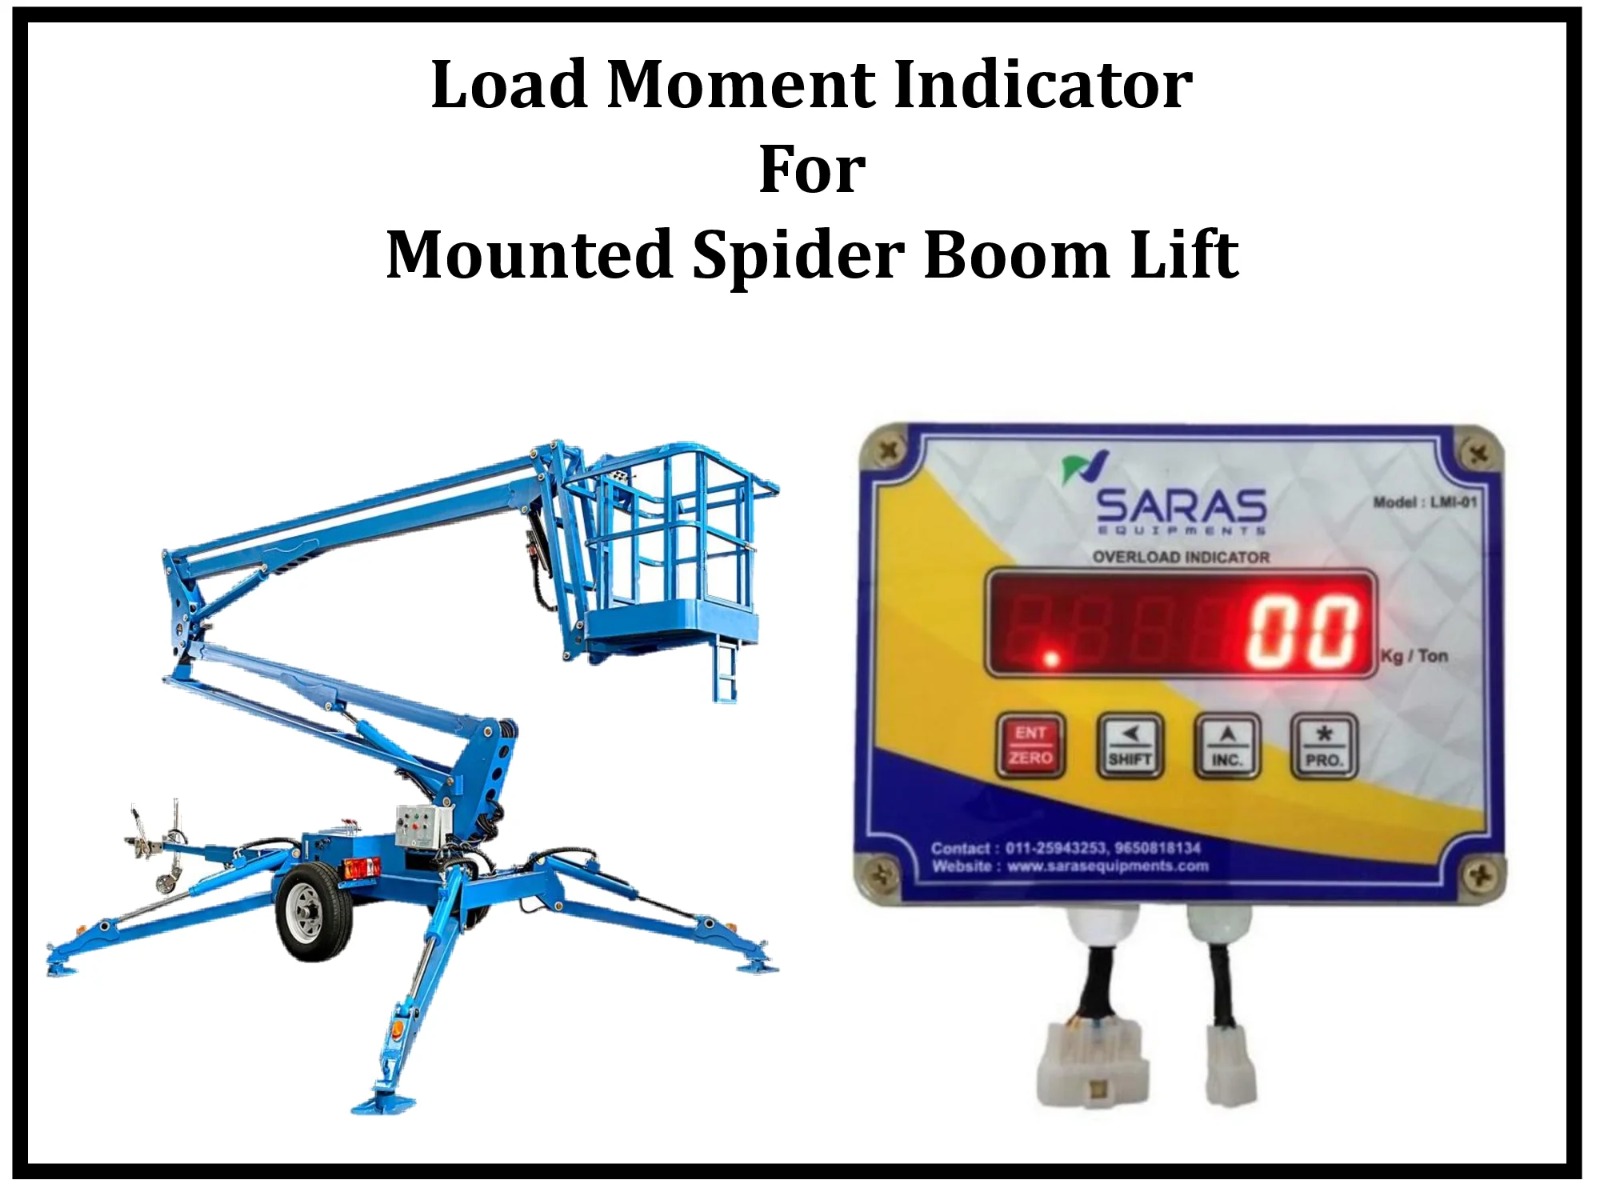 Load Moment Indicator For Mounted Spider Boom Lift